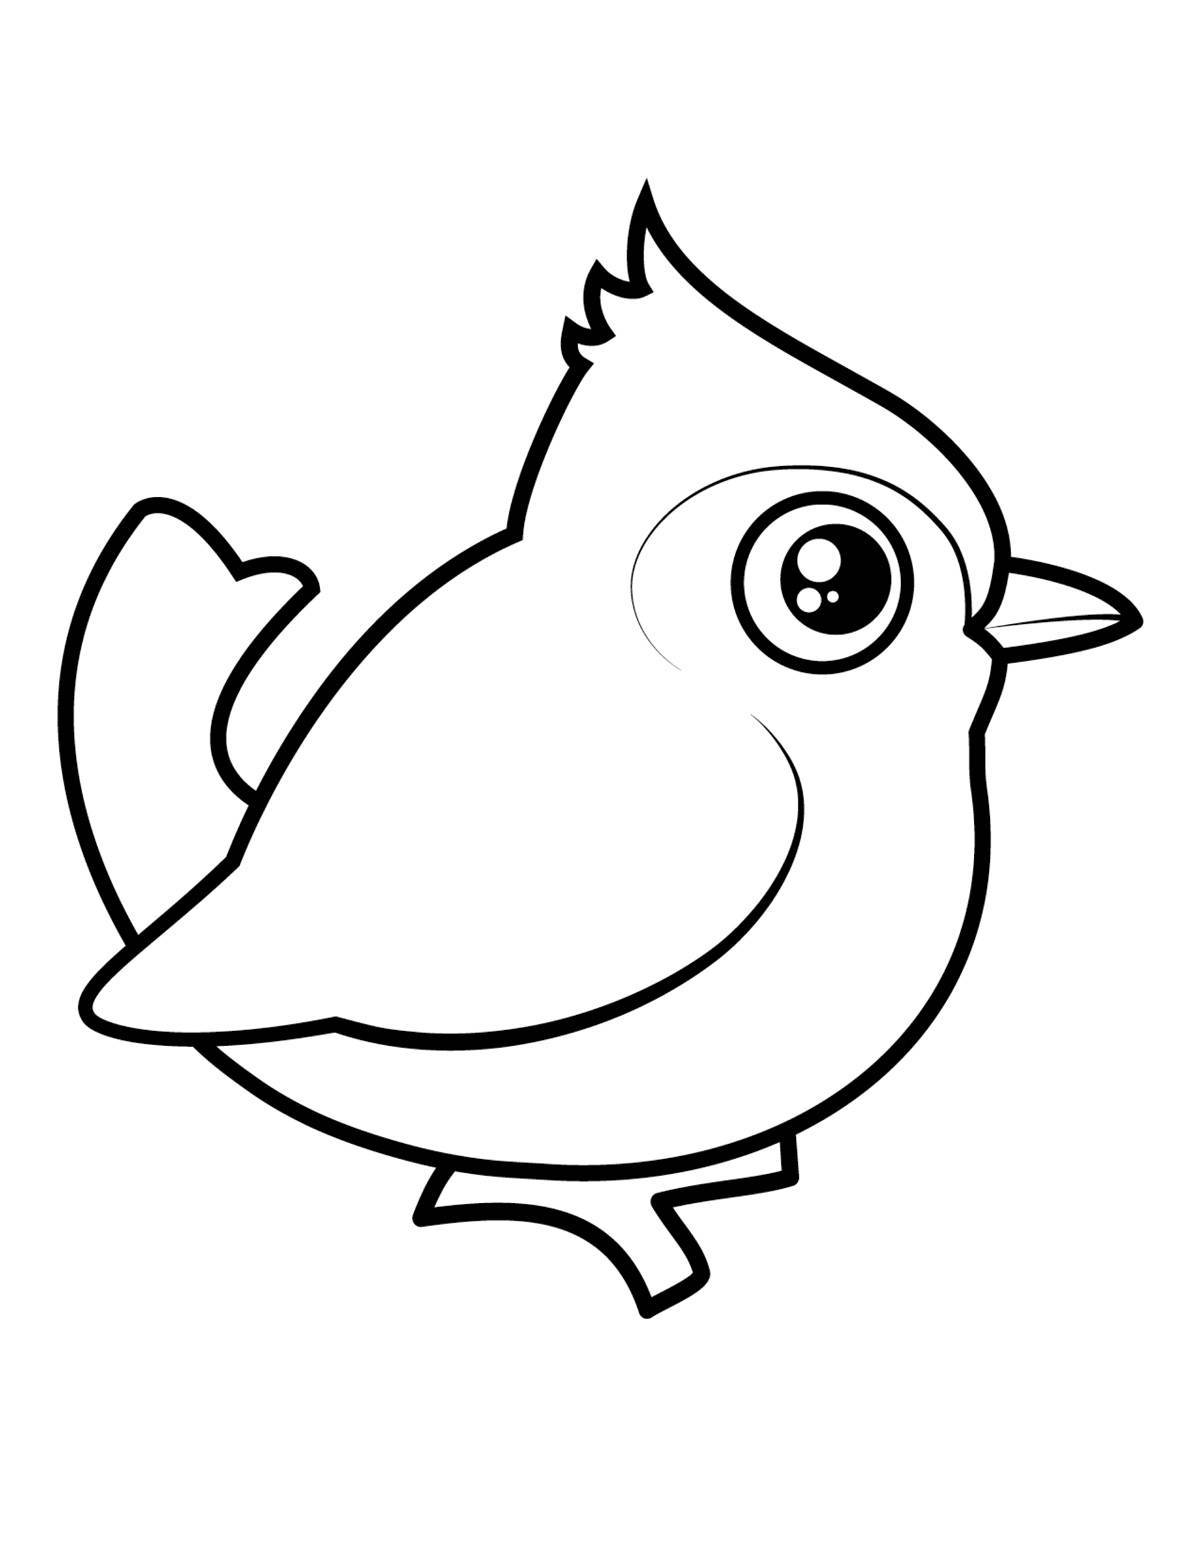 Sunny bird coloring book for kids